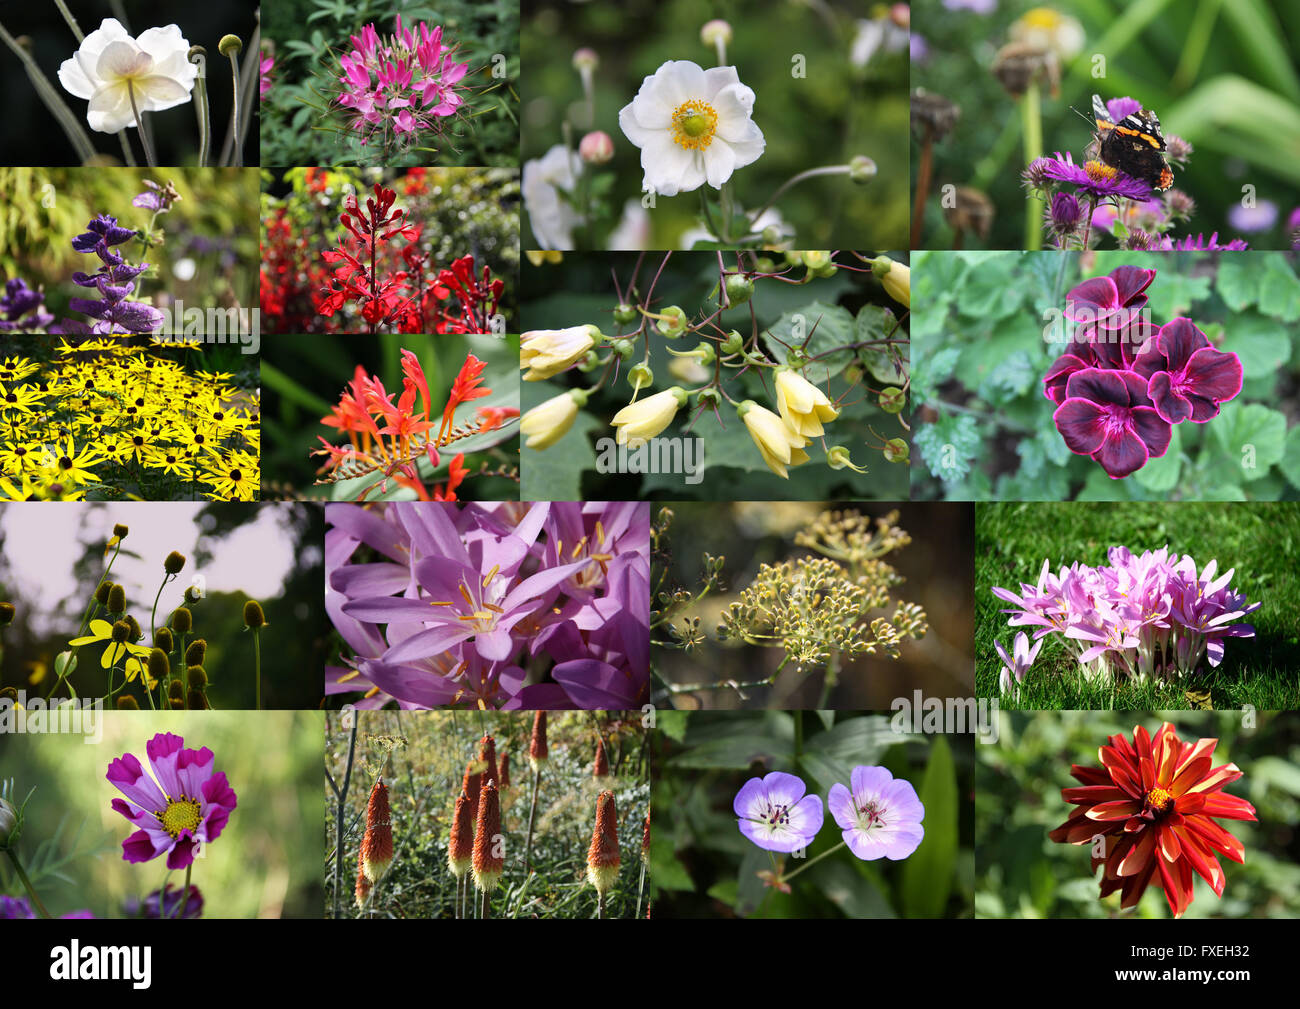 Floral collage of various photos of colorful blooming plants and flowers in fall season, Dorset, England, Great Britain, UK. Stock Photo